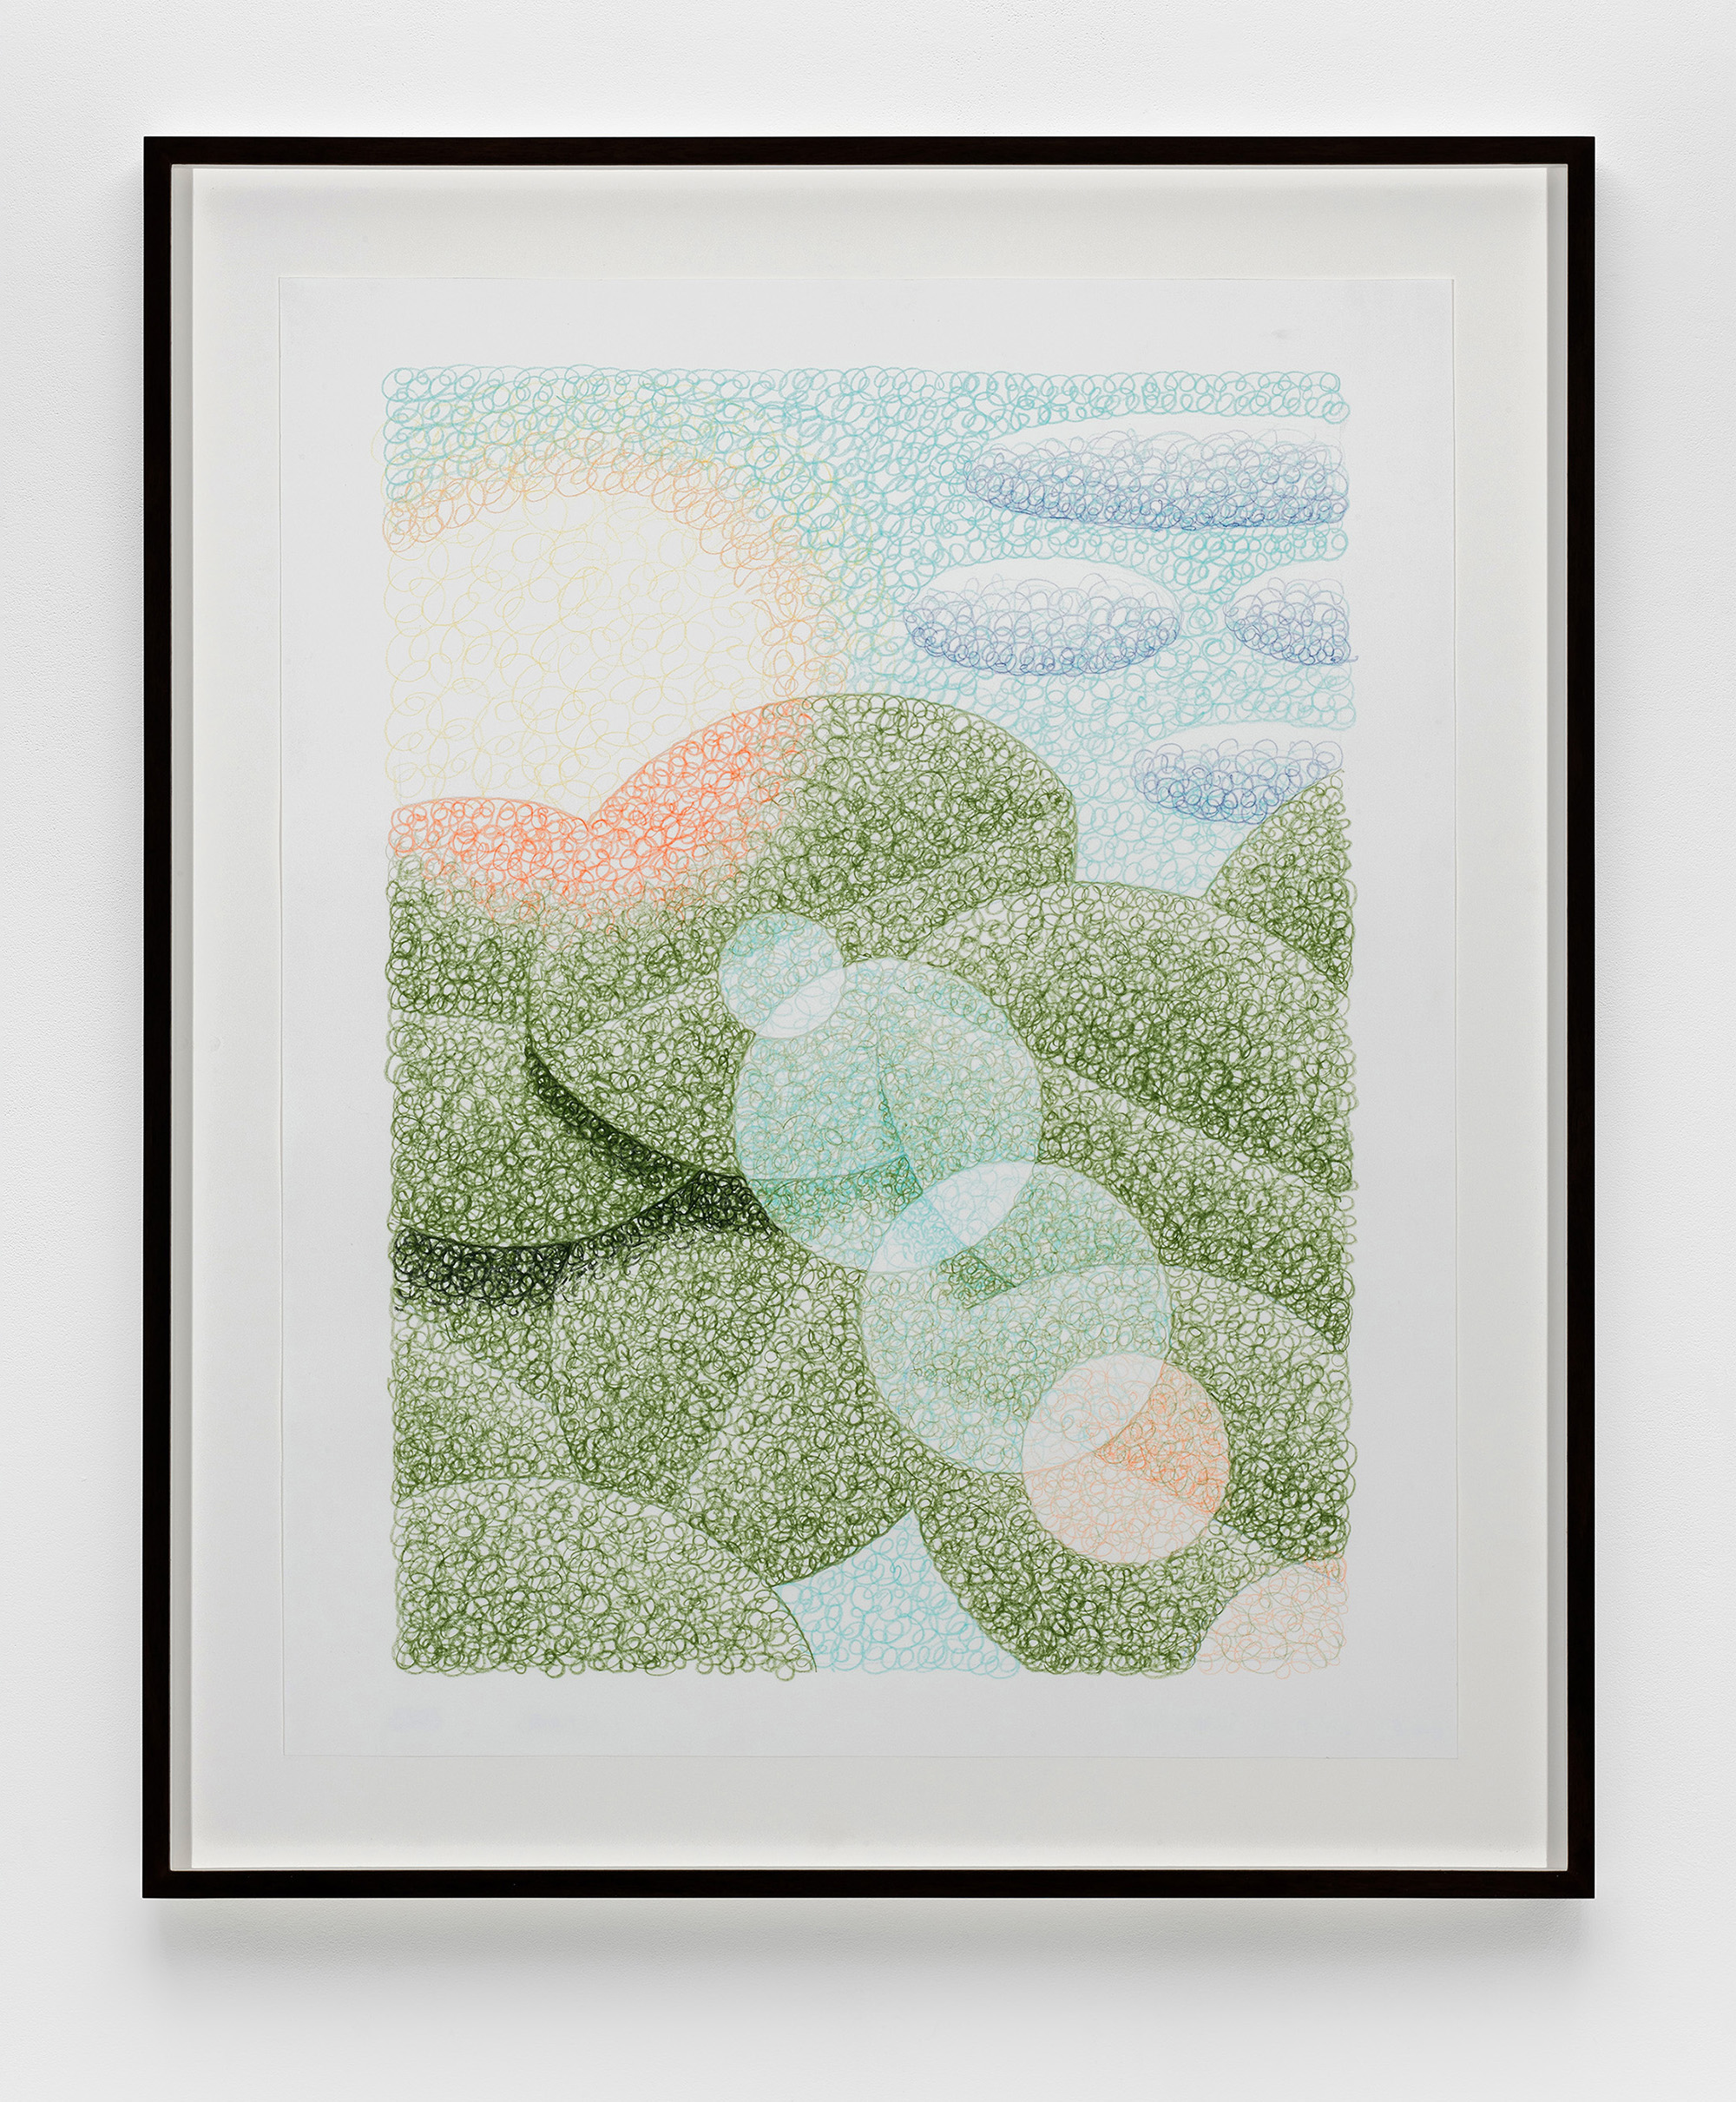 Laurens Legiers, Untitled (Leaves with a Sun Glare), 2023, pencil on paper, 48 x 36 cm (18 7/8 x 14 1/8 in); framed: 65.5 x 54.5 cm (25 3/4 x 21 1/2 in).